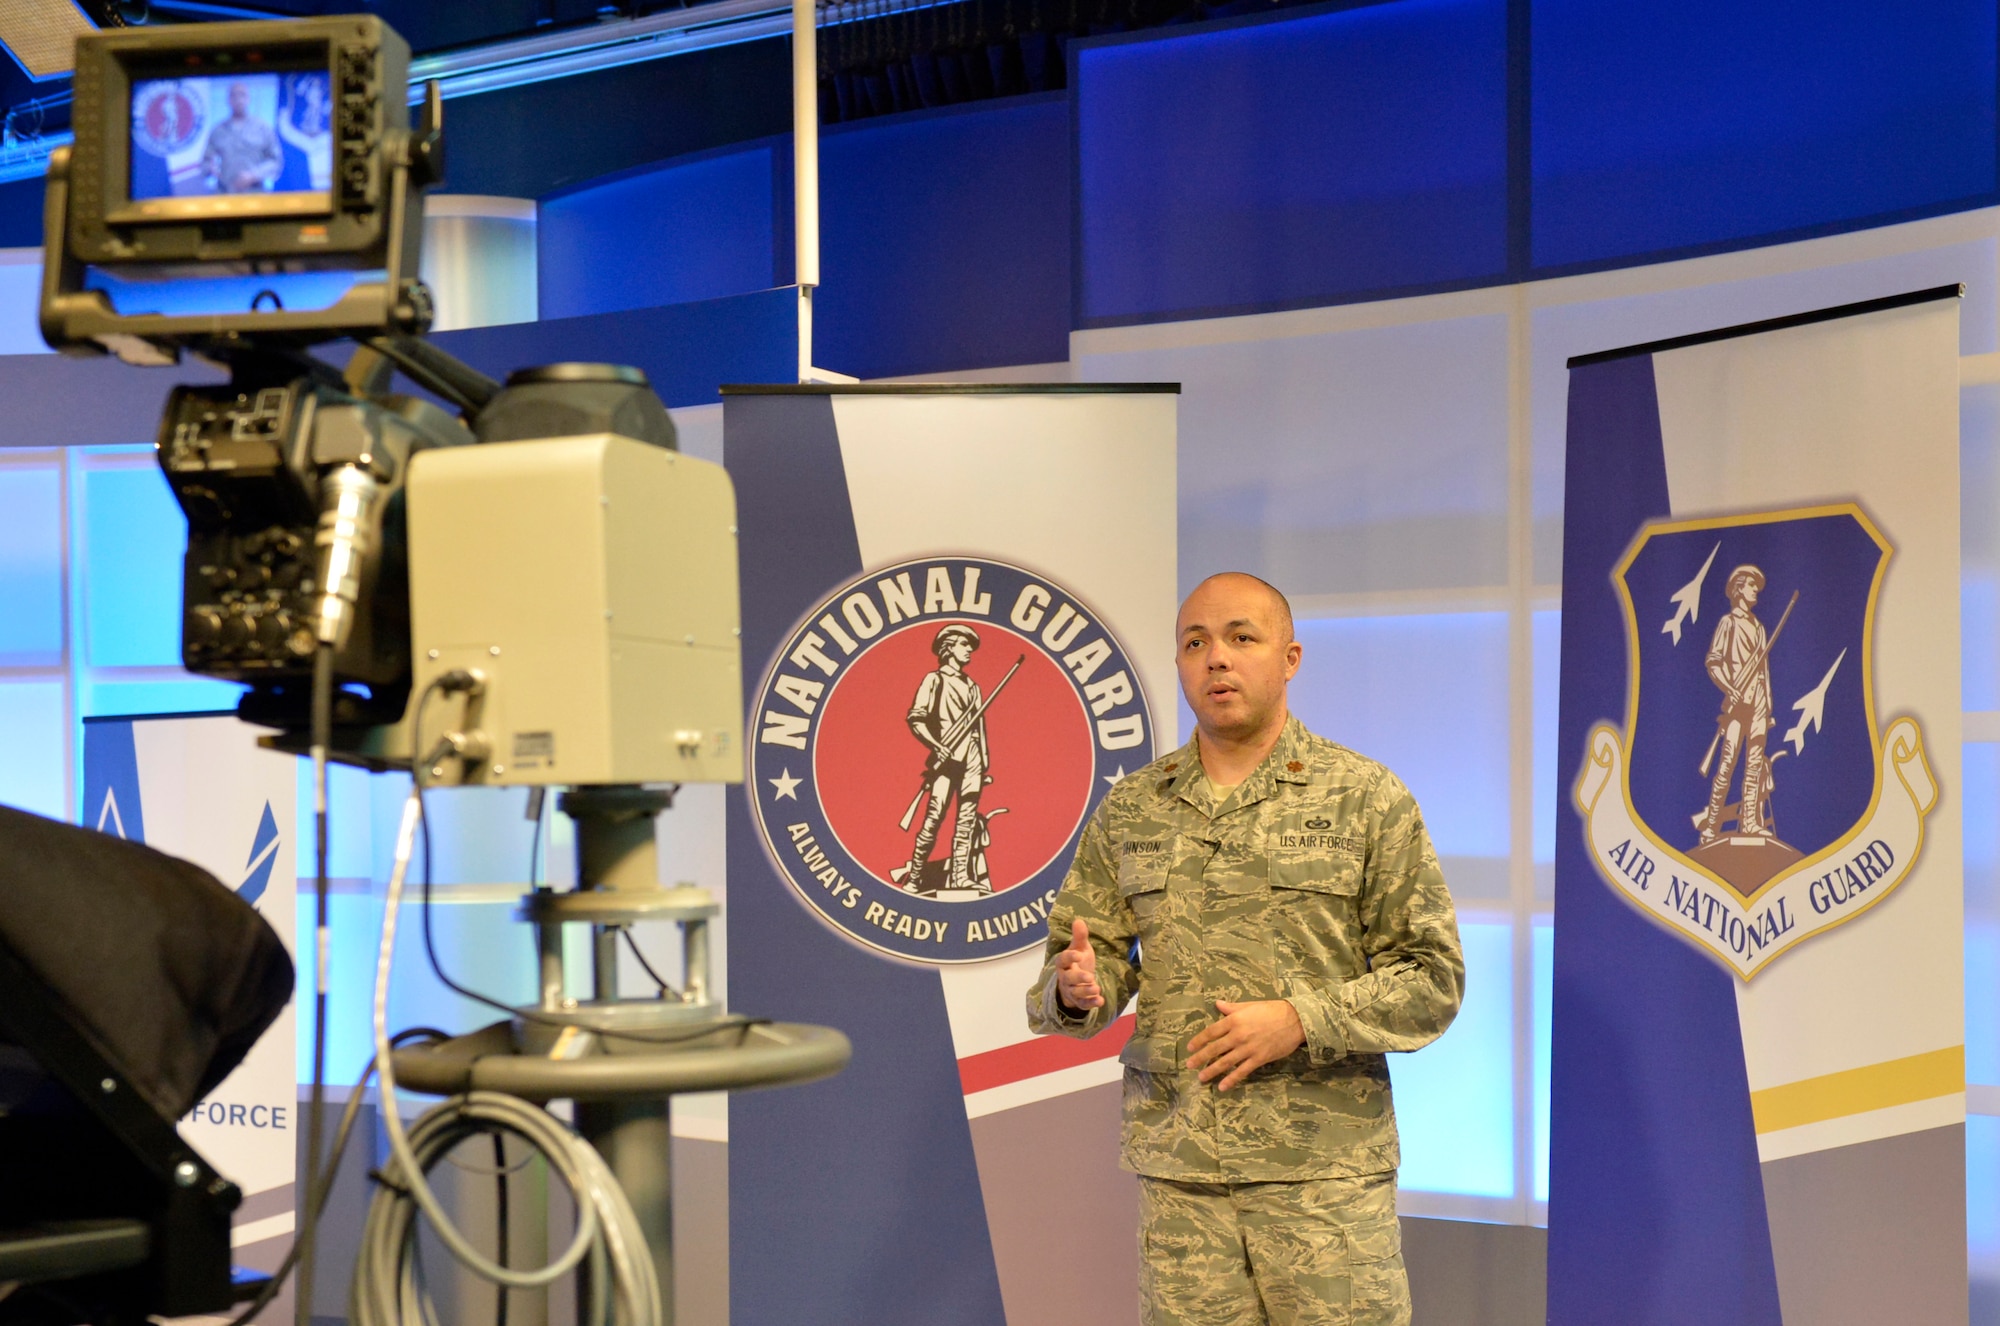 MCGHEE TYSON AIR NATIONAL GUARD BASE, Tenn. - U.S. Air Force Maj. Gabe Johnson, deputy commander of the I.G. Brown Training and Education Center (TEC), teaches a professional development seminar here on personal accountability in a live HD broadcast from TEC TV to the National Guard's LaVern E. Weber Professional Education Center in Little Rock, Ark., Sept. 16, 2013. (U.S. Air National Guard photo by Master Sgt. Kurt Skoglund/Released) 